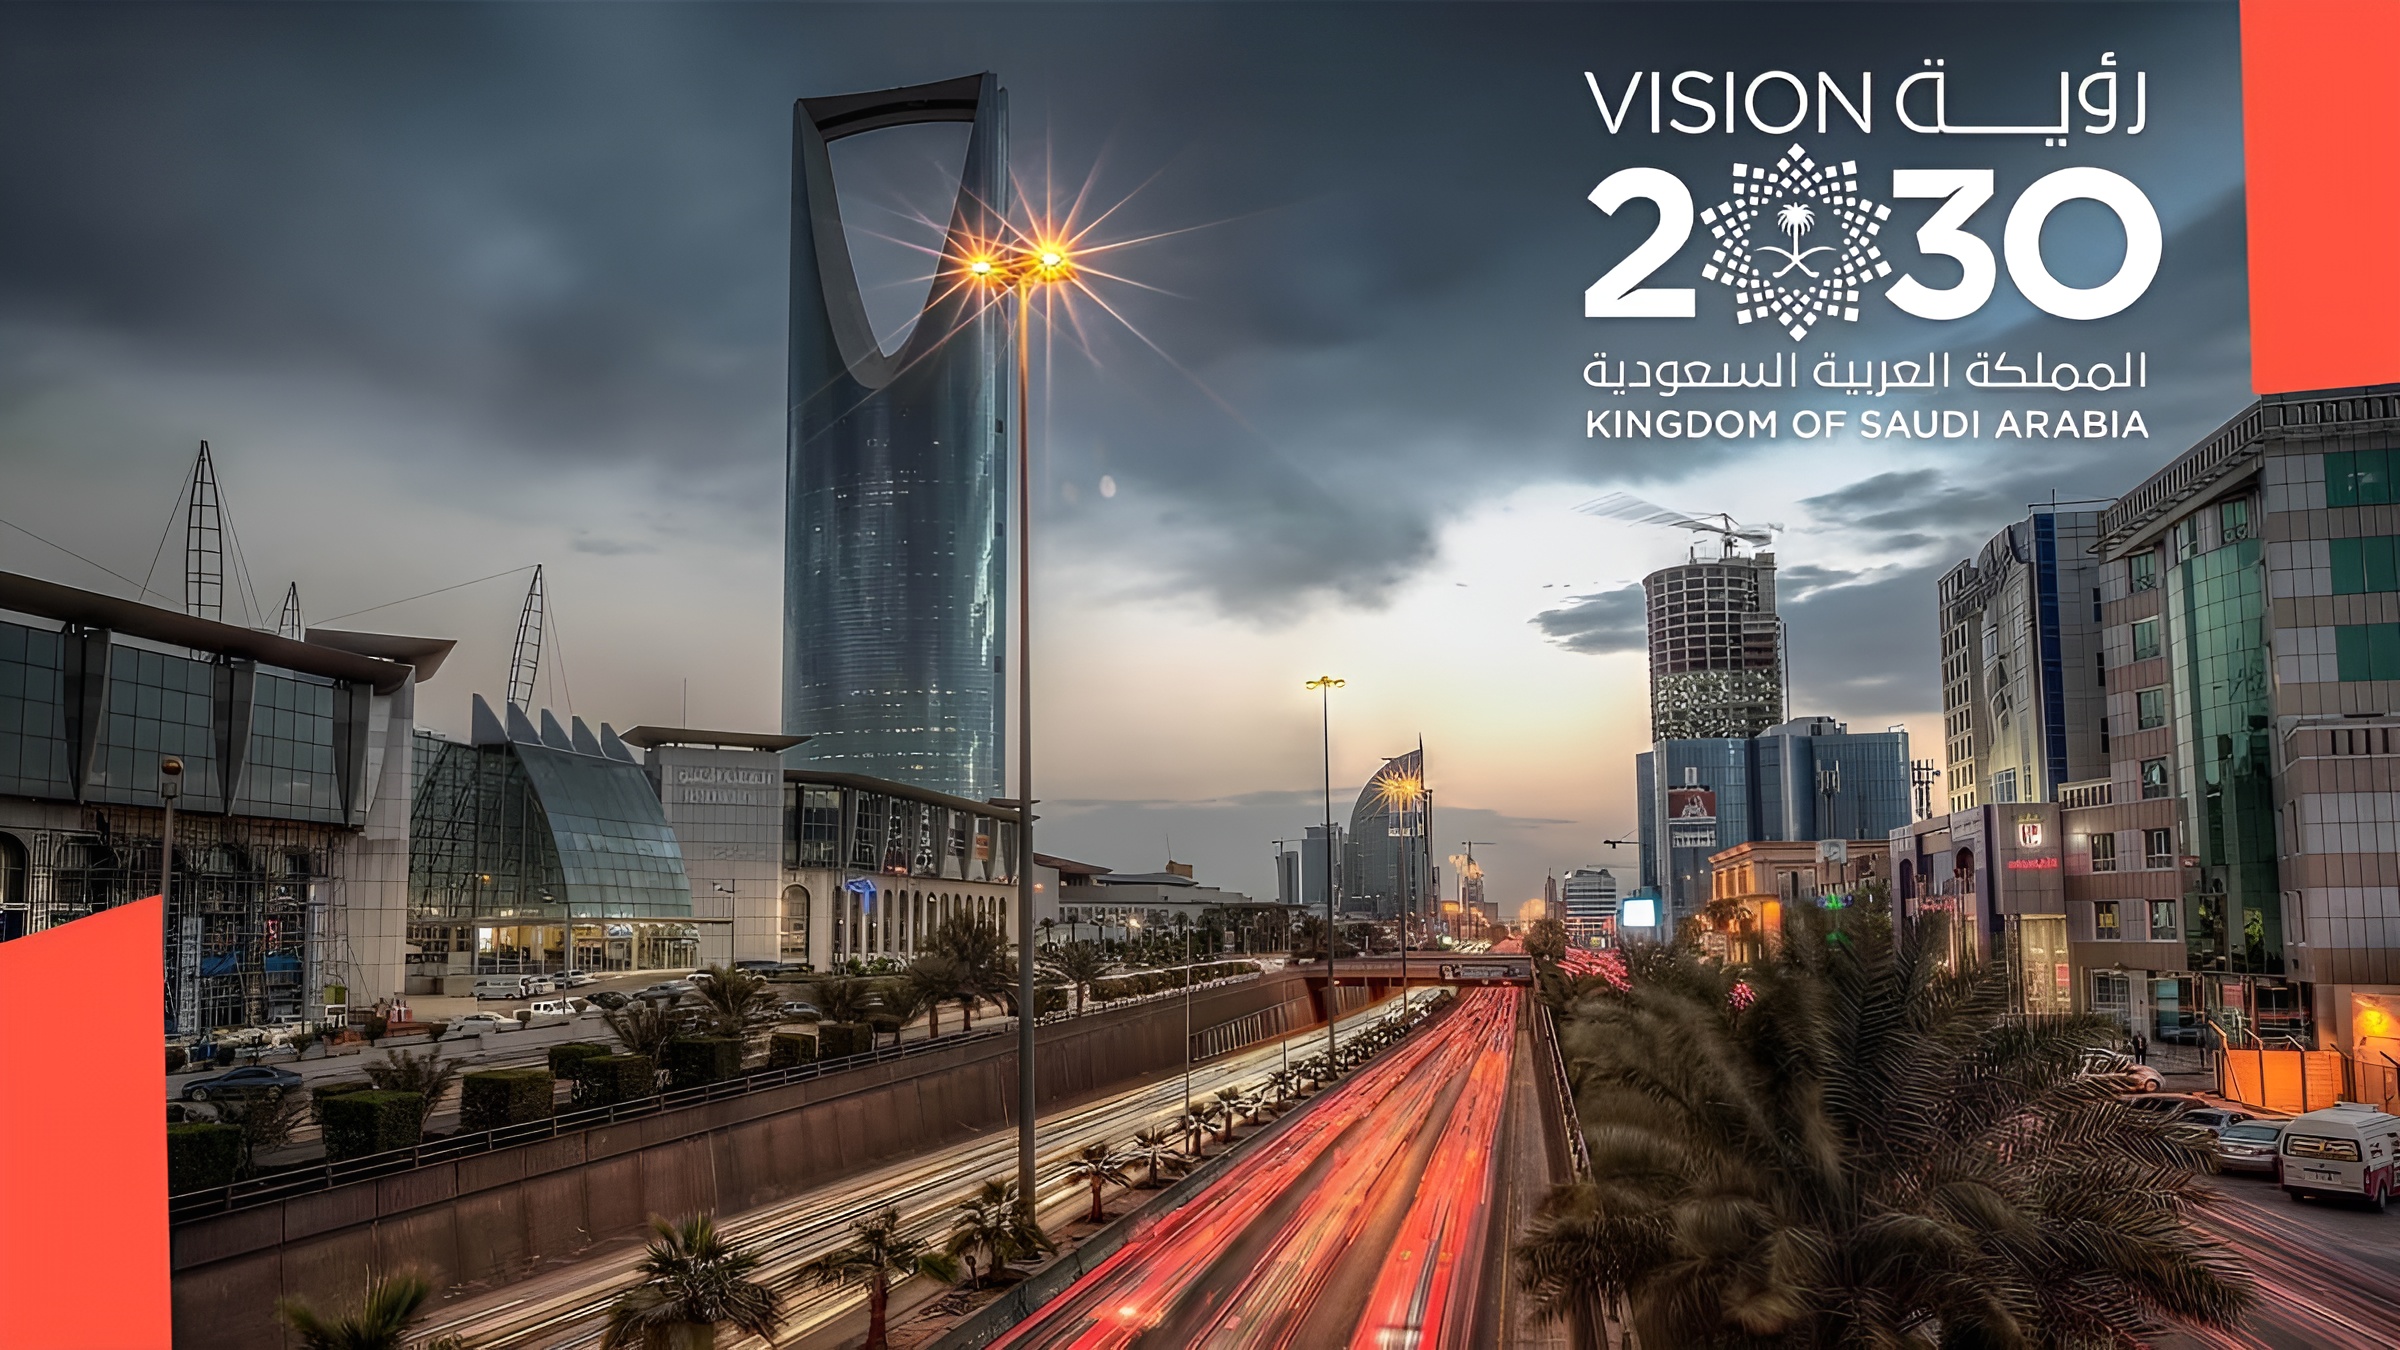 WE SERVE THE COMMUNITY ACCORDING TO THE KINGDOM'S 2030 VISION